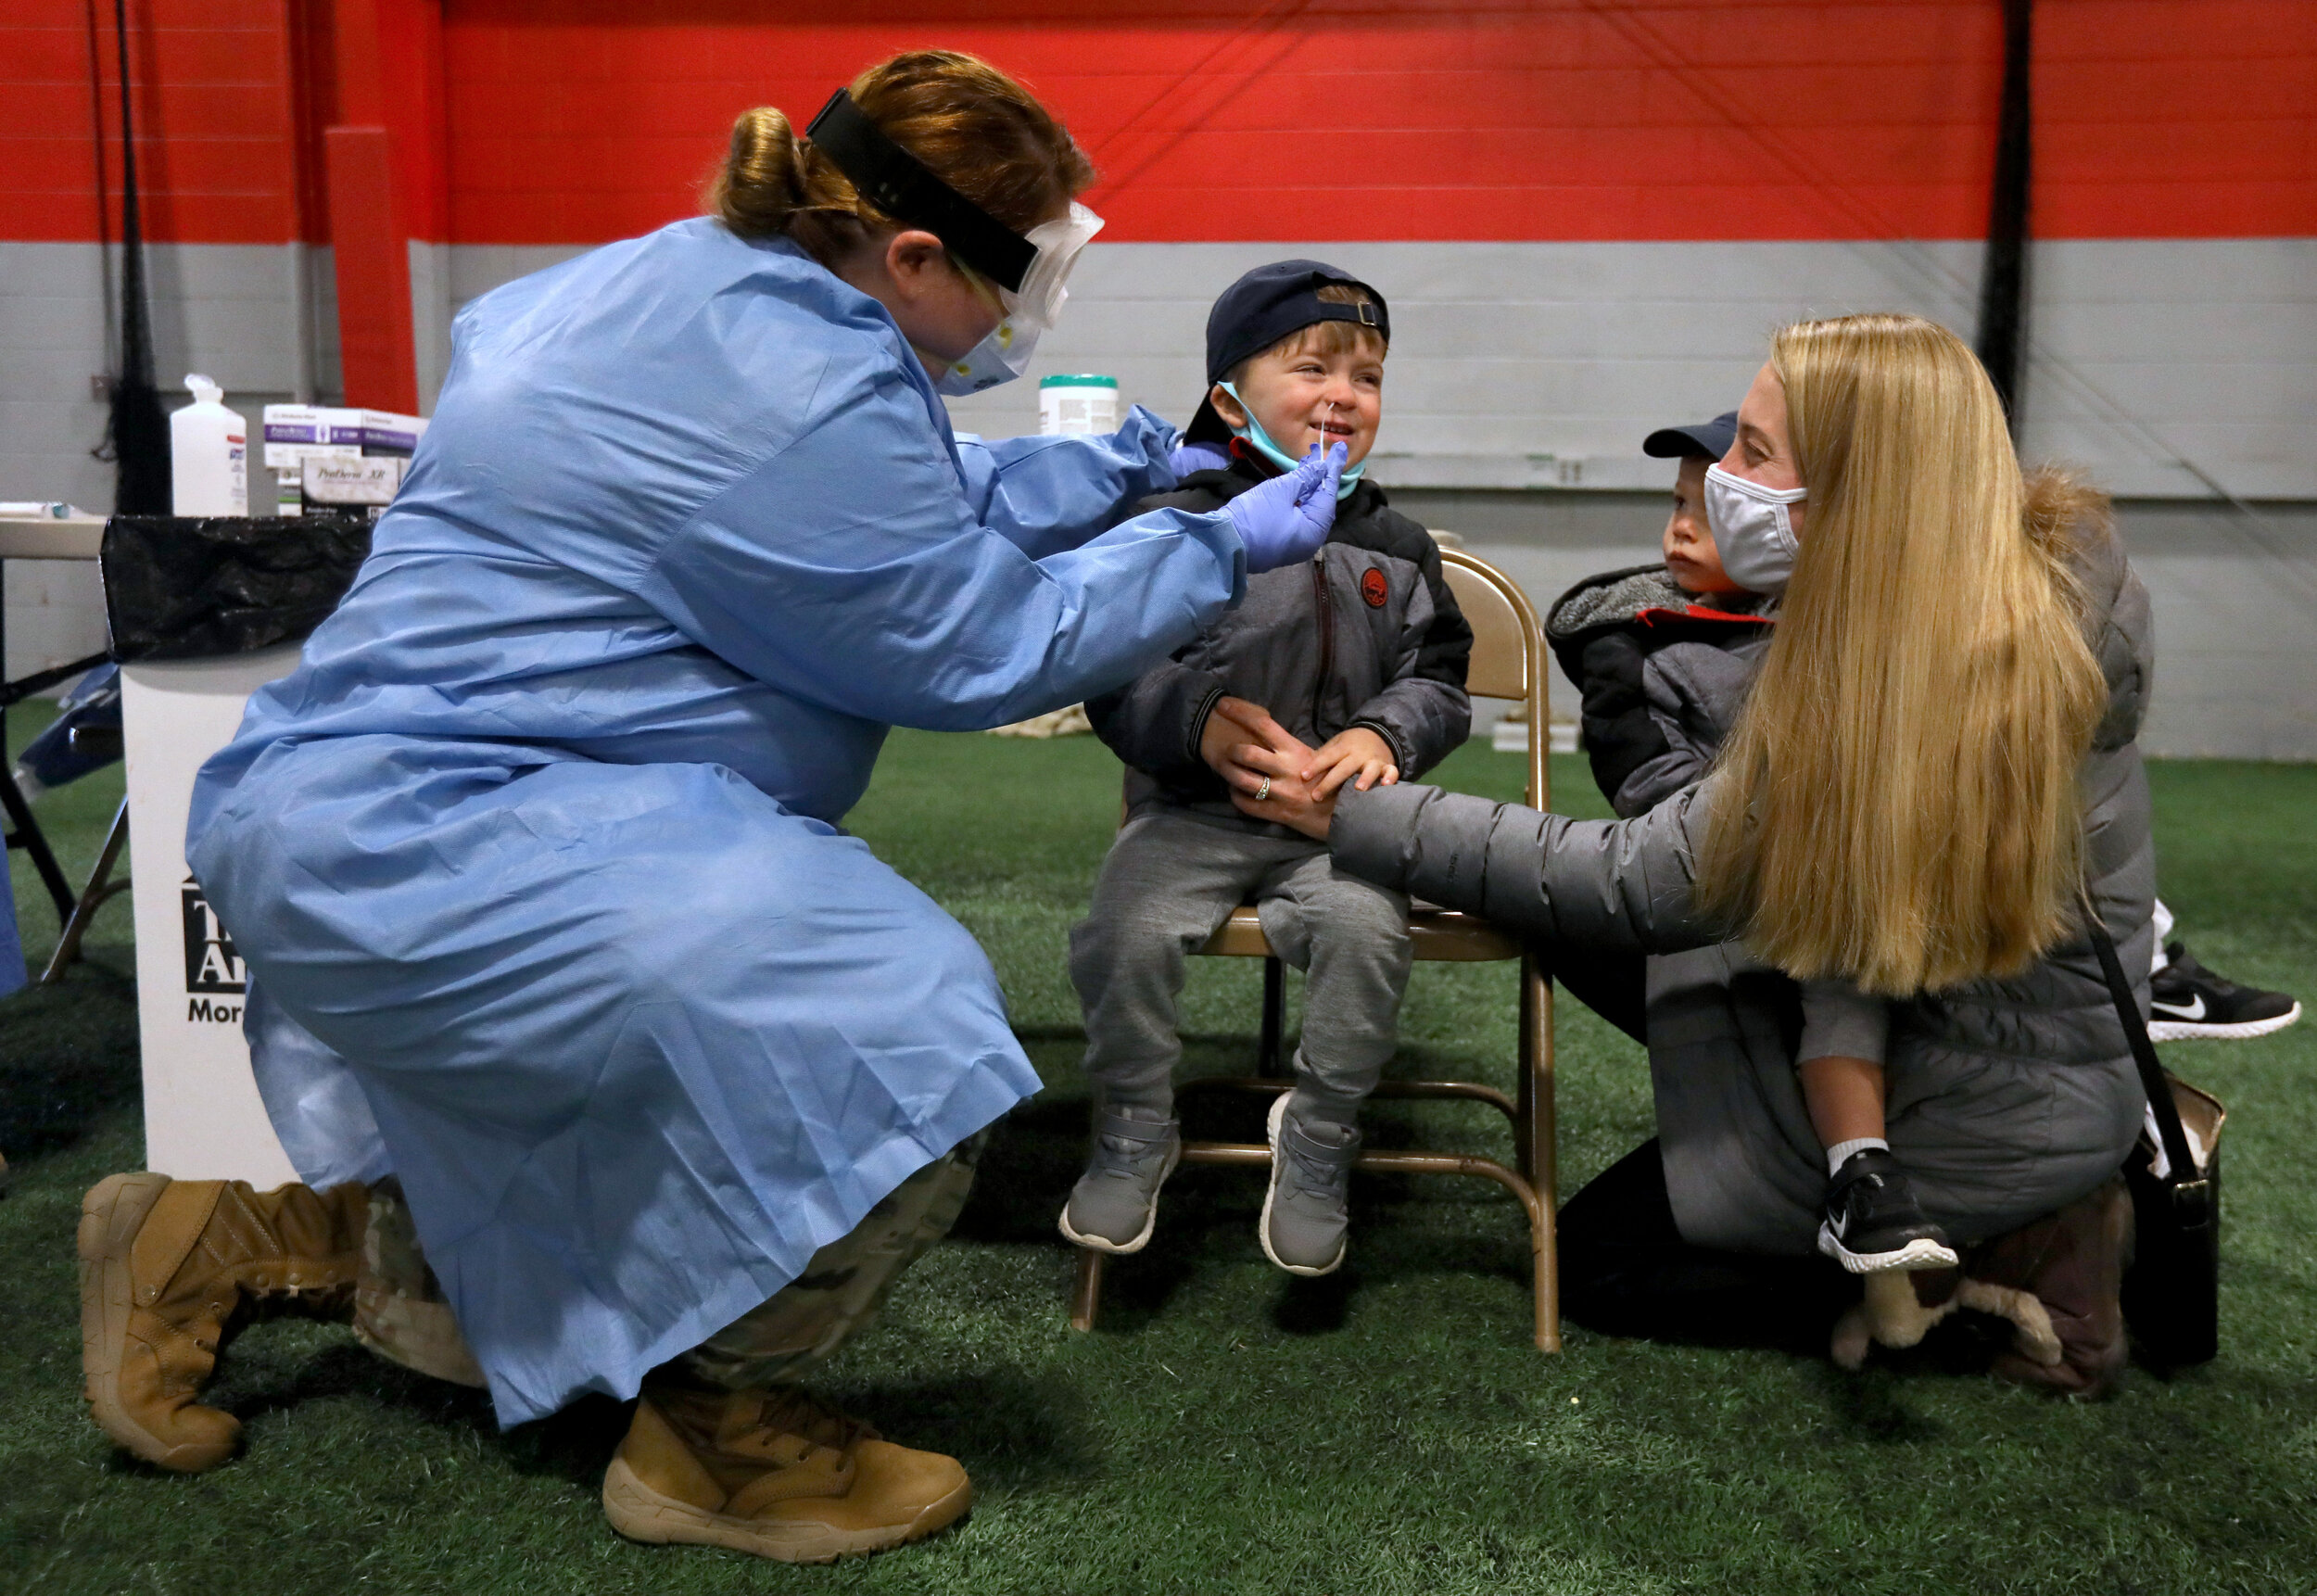  Finn McDonald, 3, is tested for the coronavirus by Army Cpl. Nikki Sherman at the Lucas County Rec Center in Maumee. Watching is his brother, Shay, 1, who was too young to be tested, and their mother Casey McDonald.  ©Toledo Blade | December 2020 